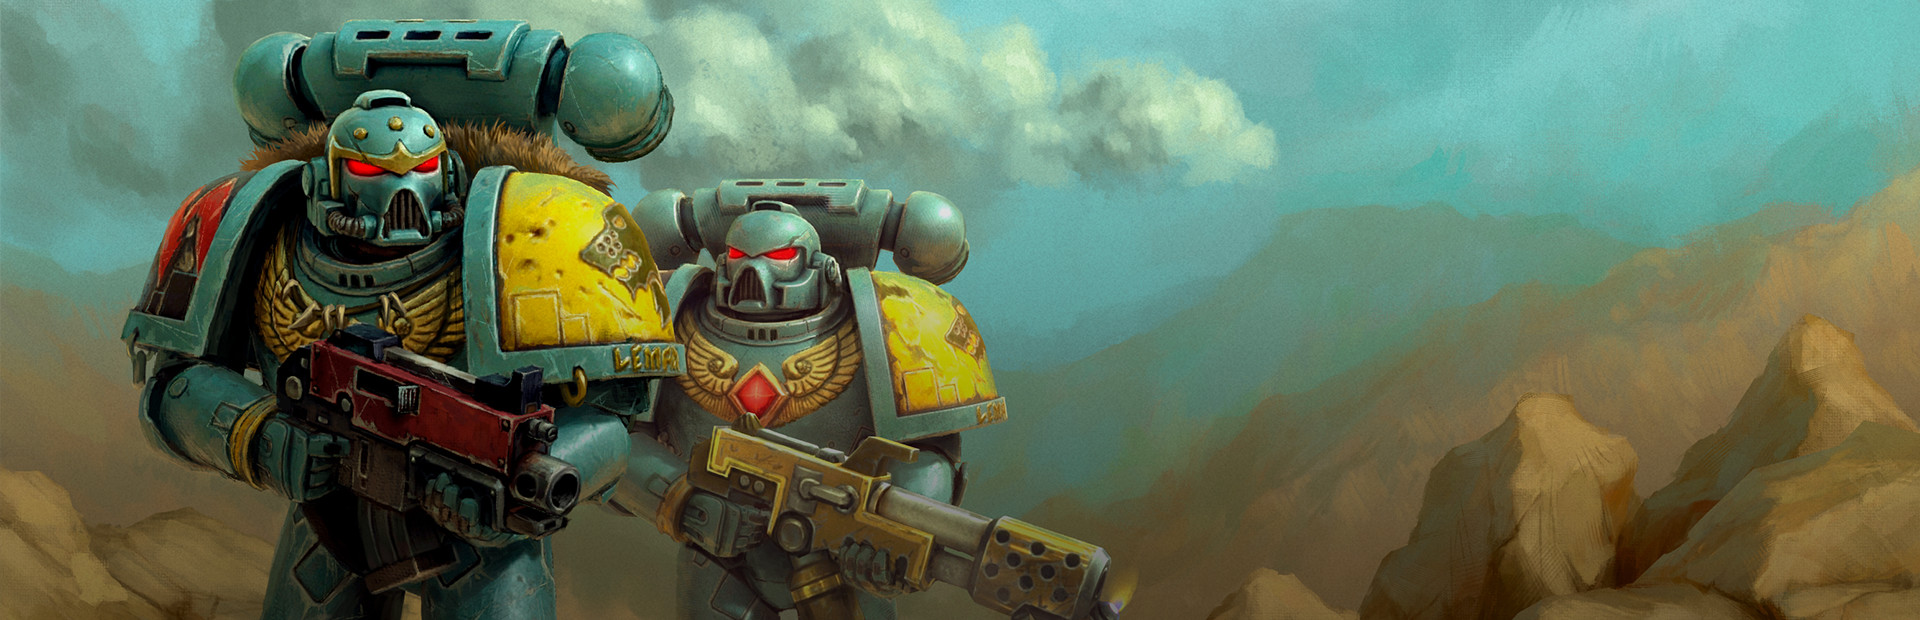 Warhammer 40,000: Space Wolf cover image